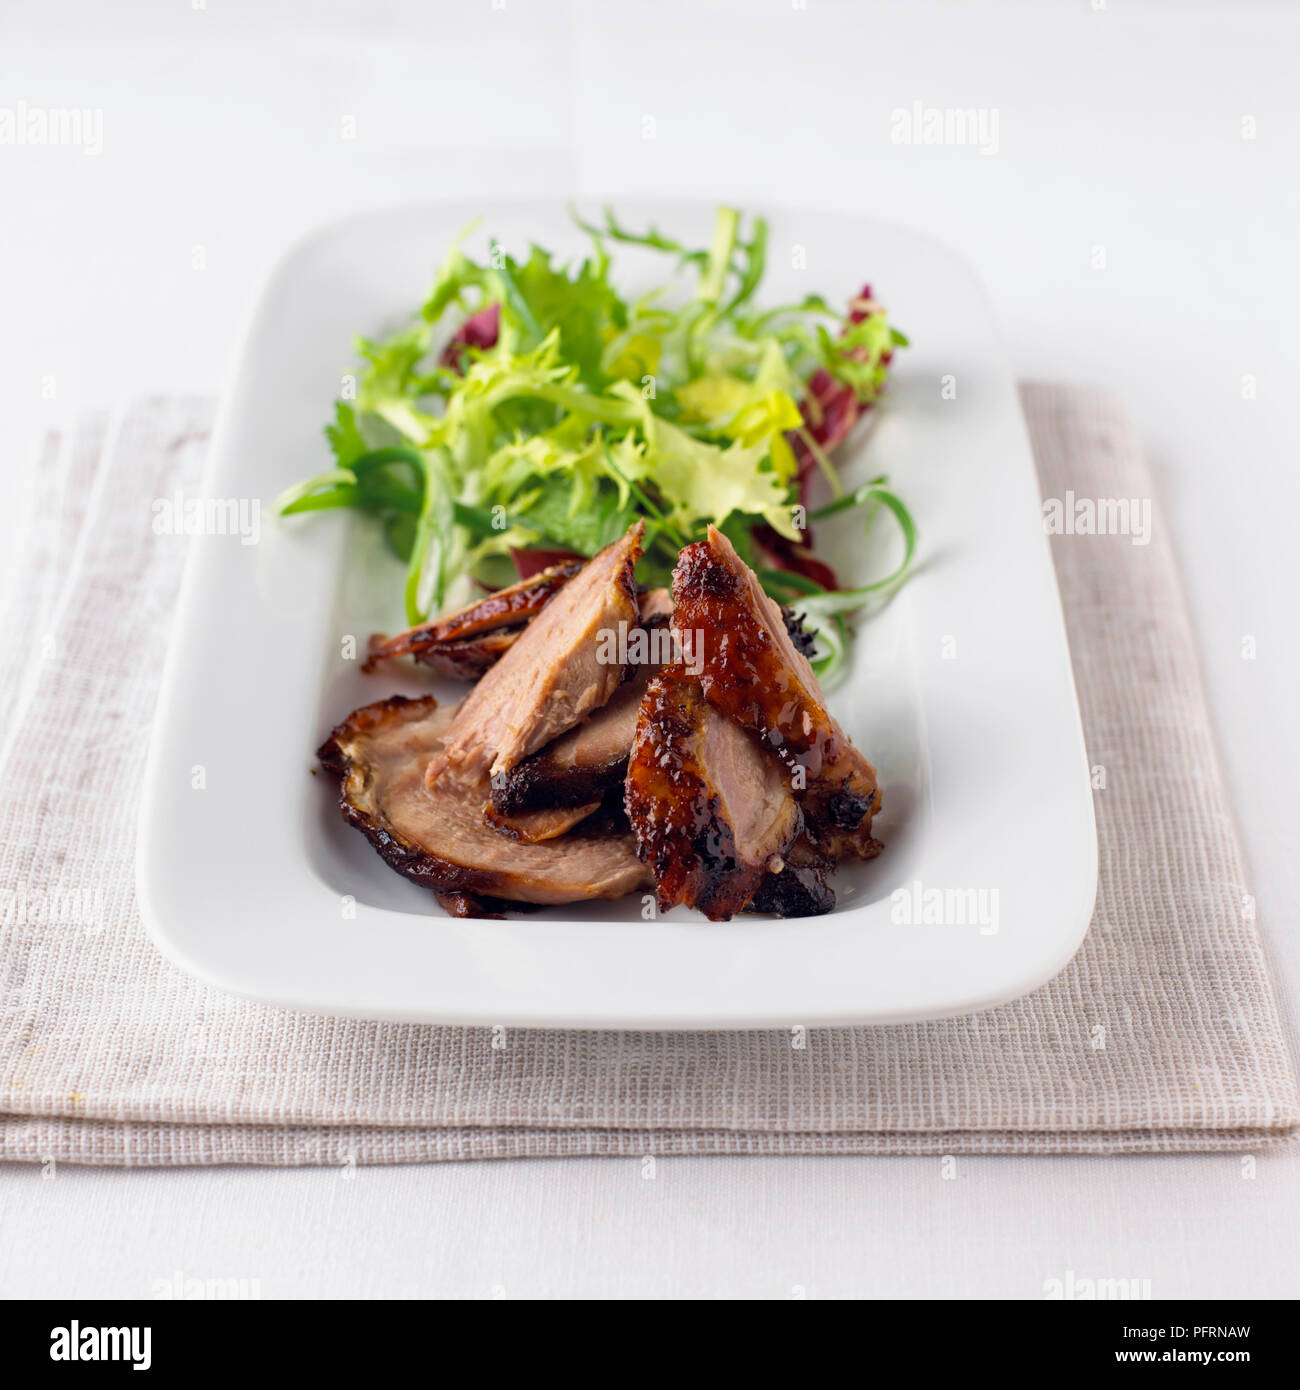 Crispy duck char sui served with lettuce in long white dish on folded tablecloth, close-up Stock Photo